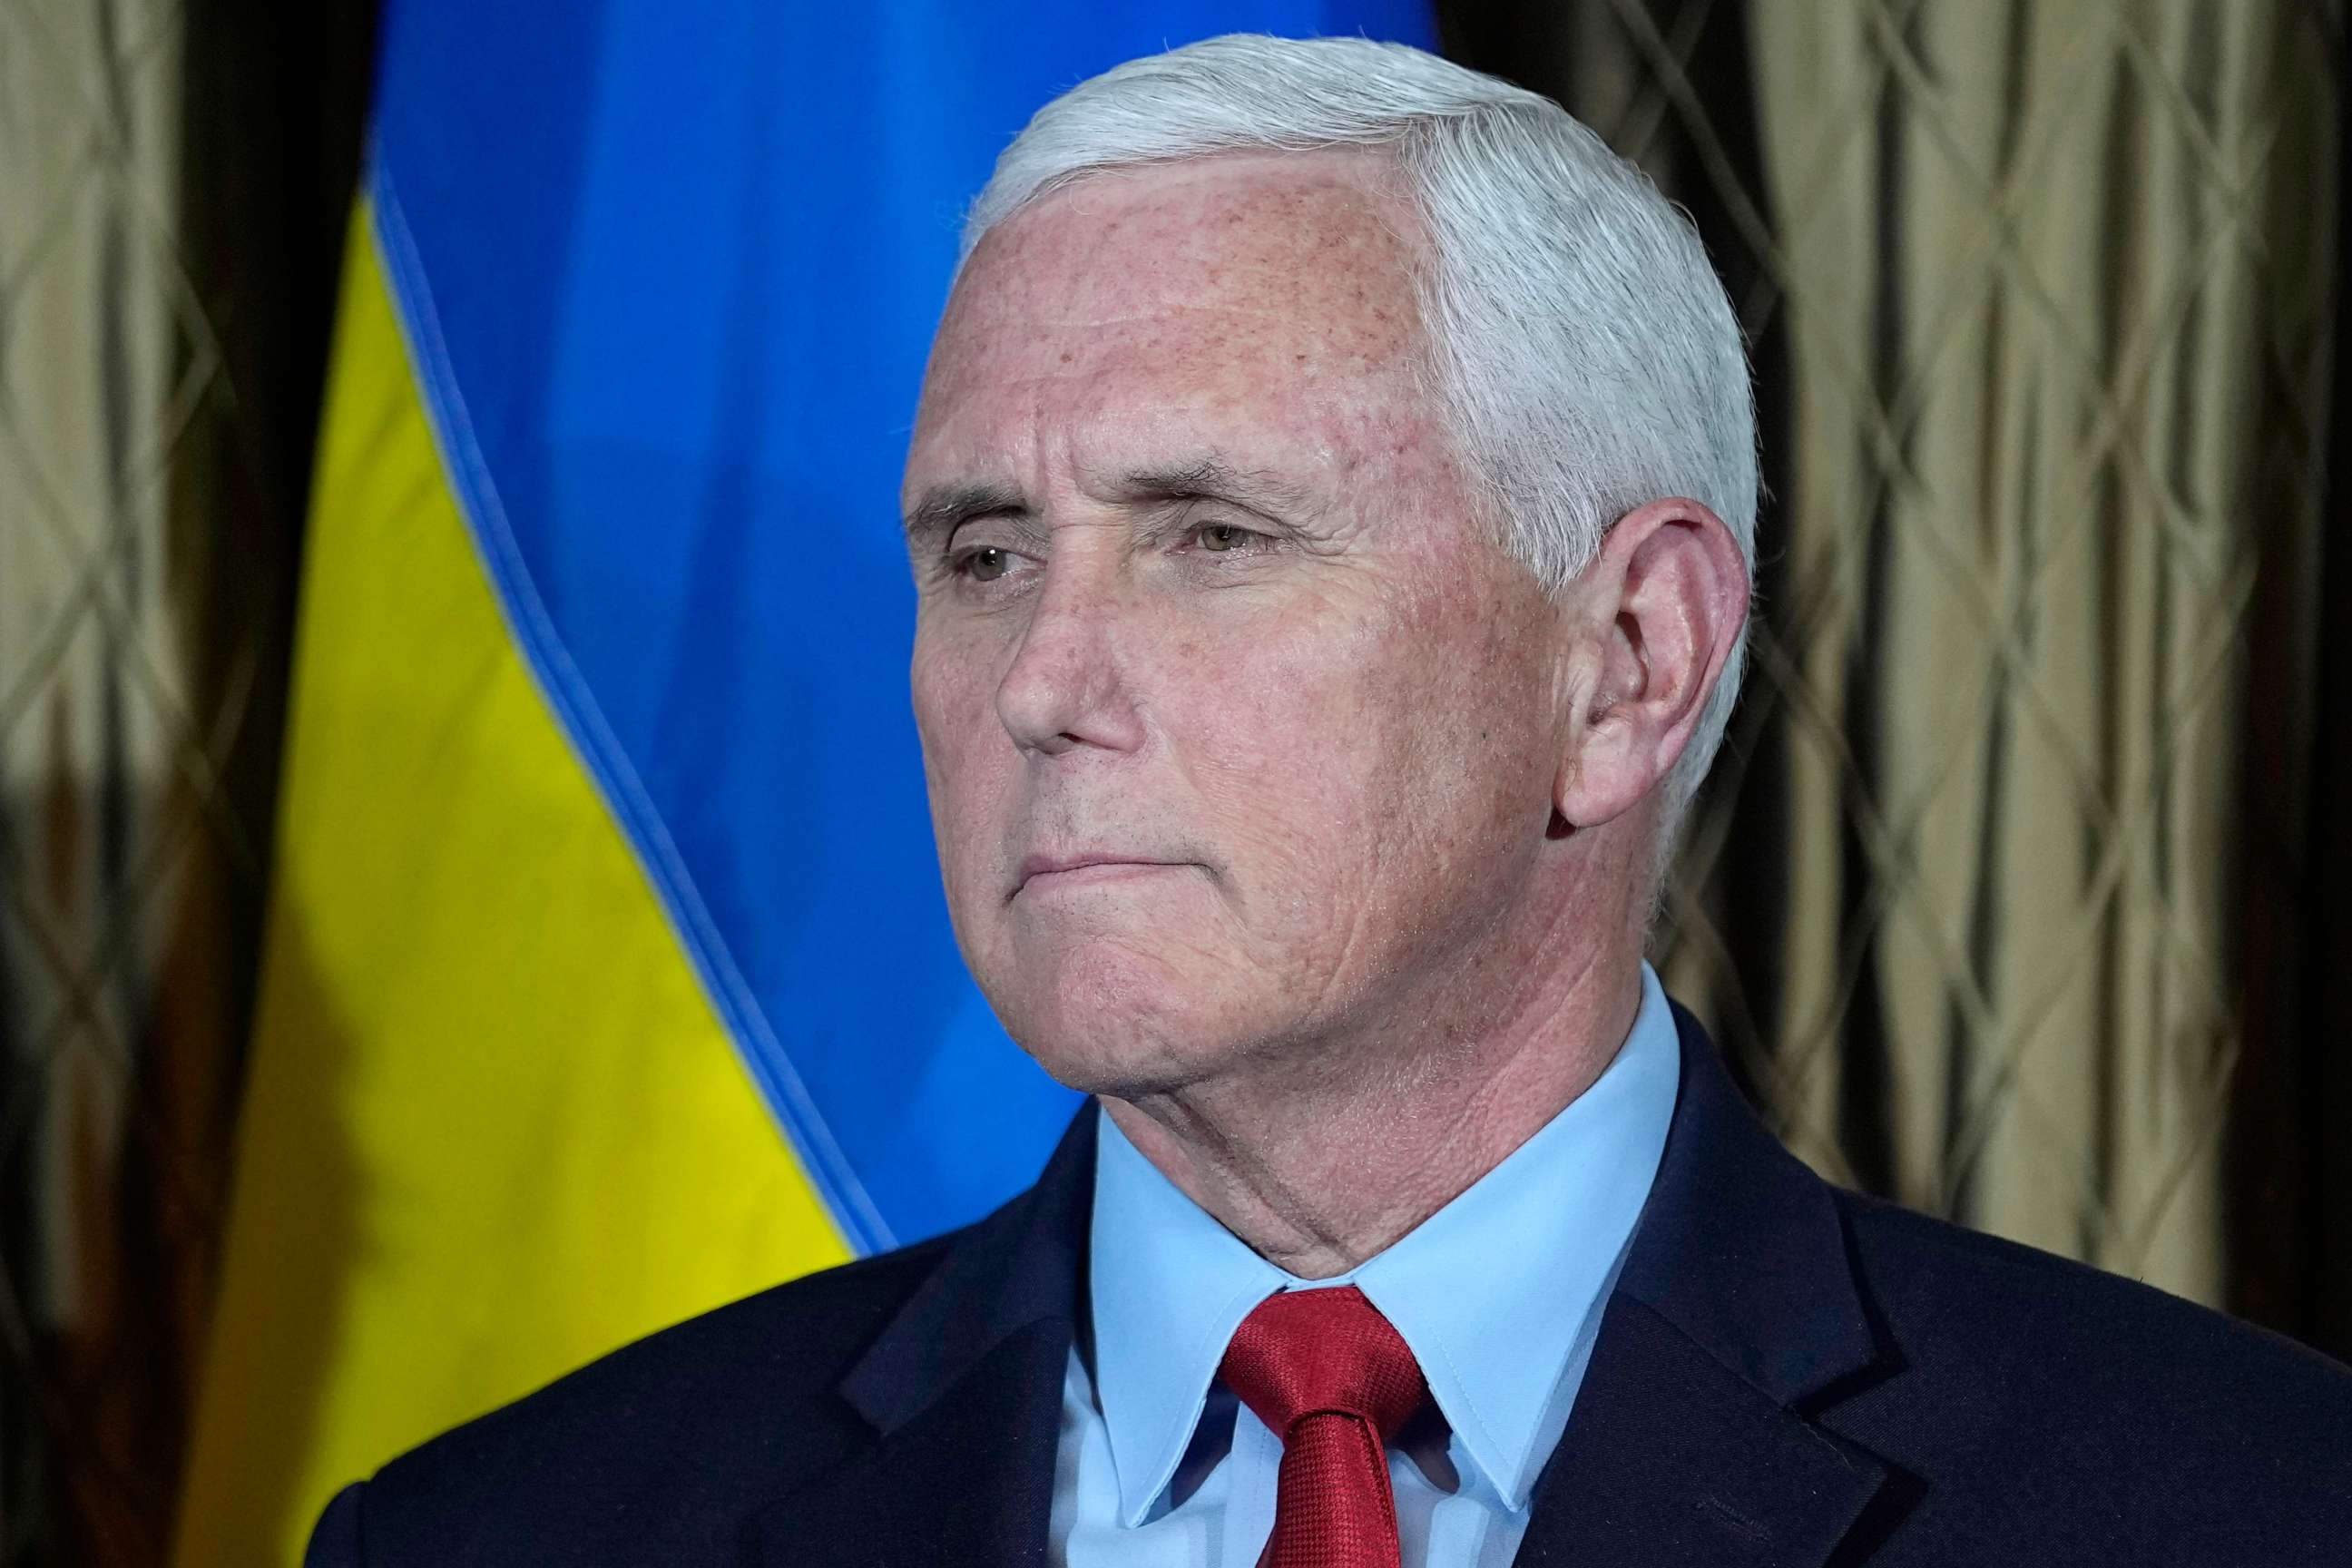 PHOTO: Former Vice President Mike Pence waits to speaks about the one-year anniversary of Russia's invasion of Ukraine during a visit to the University of Texas in Austin, Texas, Feb. 24, 2023.